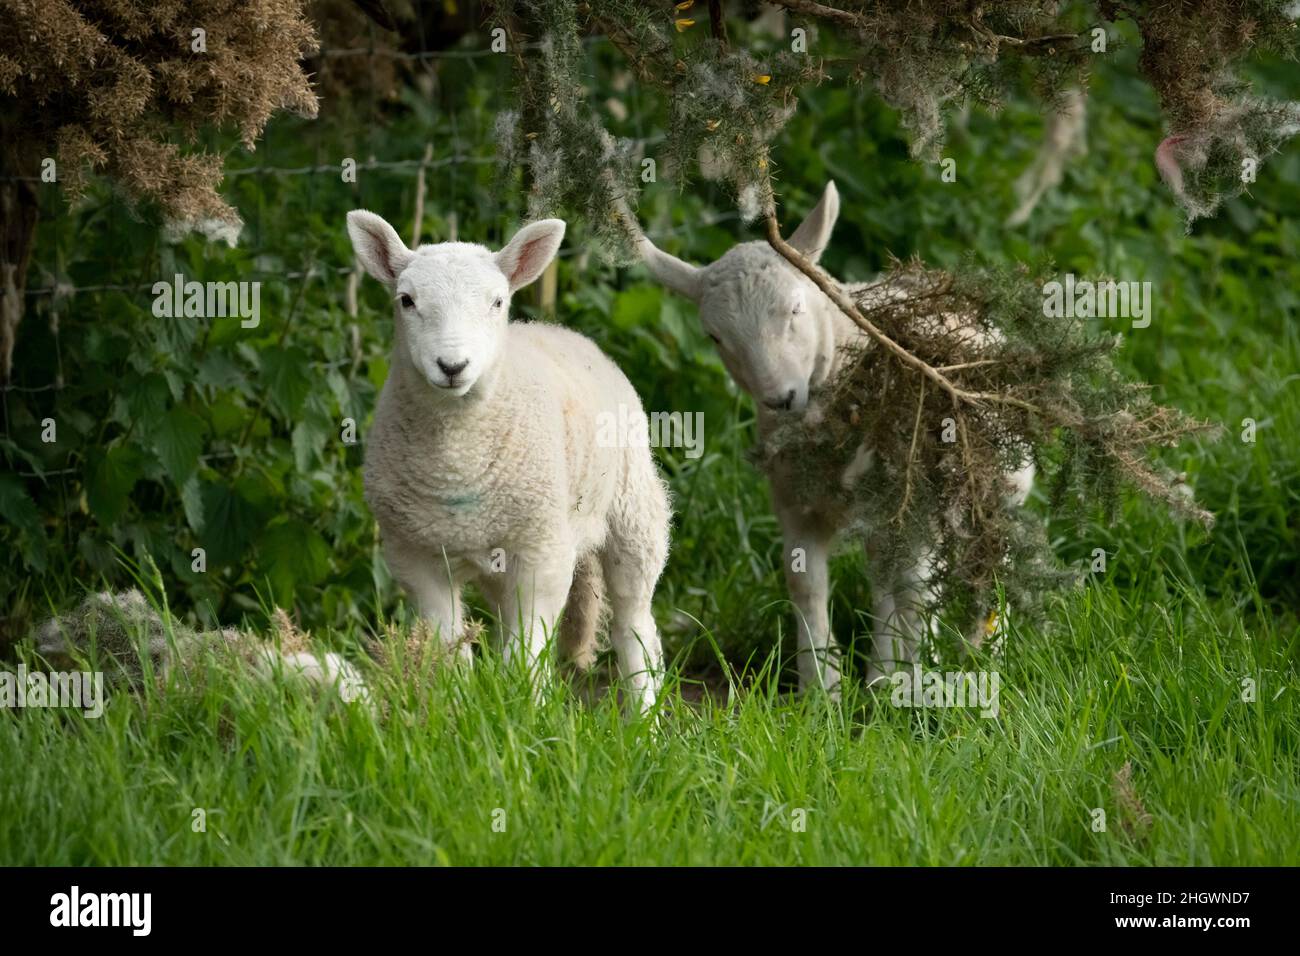 Hethpool, near Wooler, Northumberland - College Valley, Cheviot foothills. Lambing time in summer, June. Stock Photo